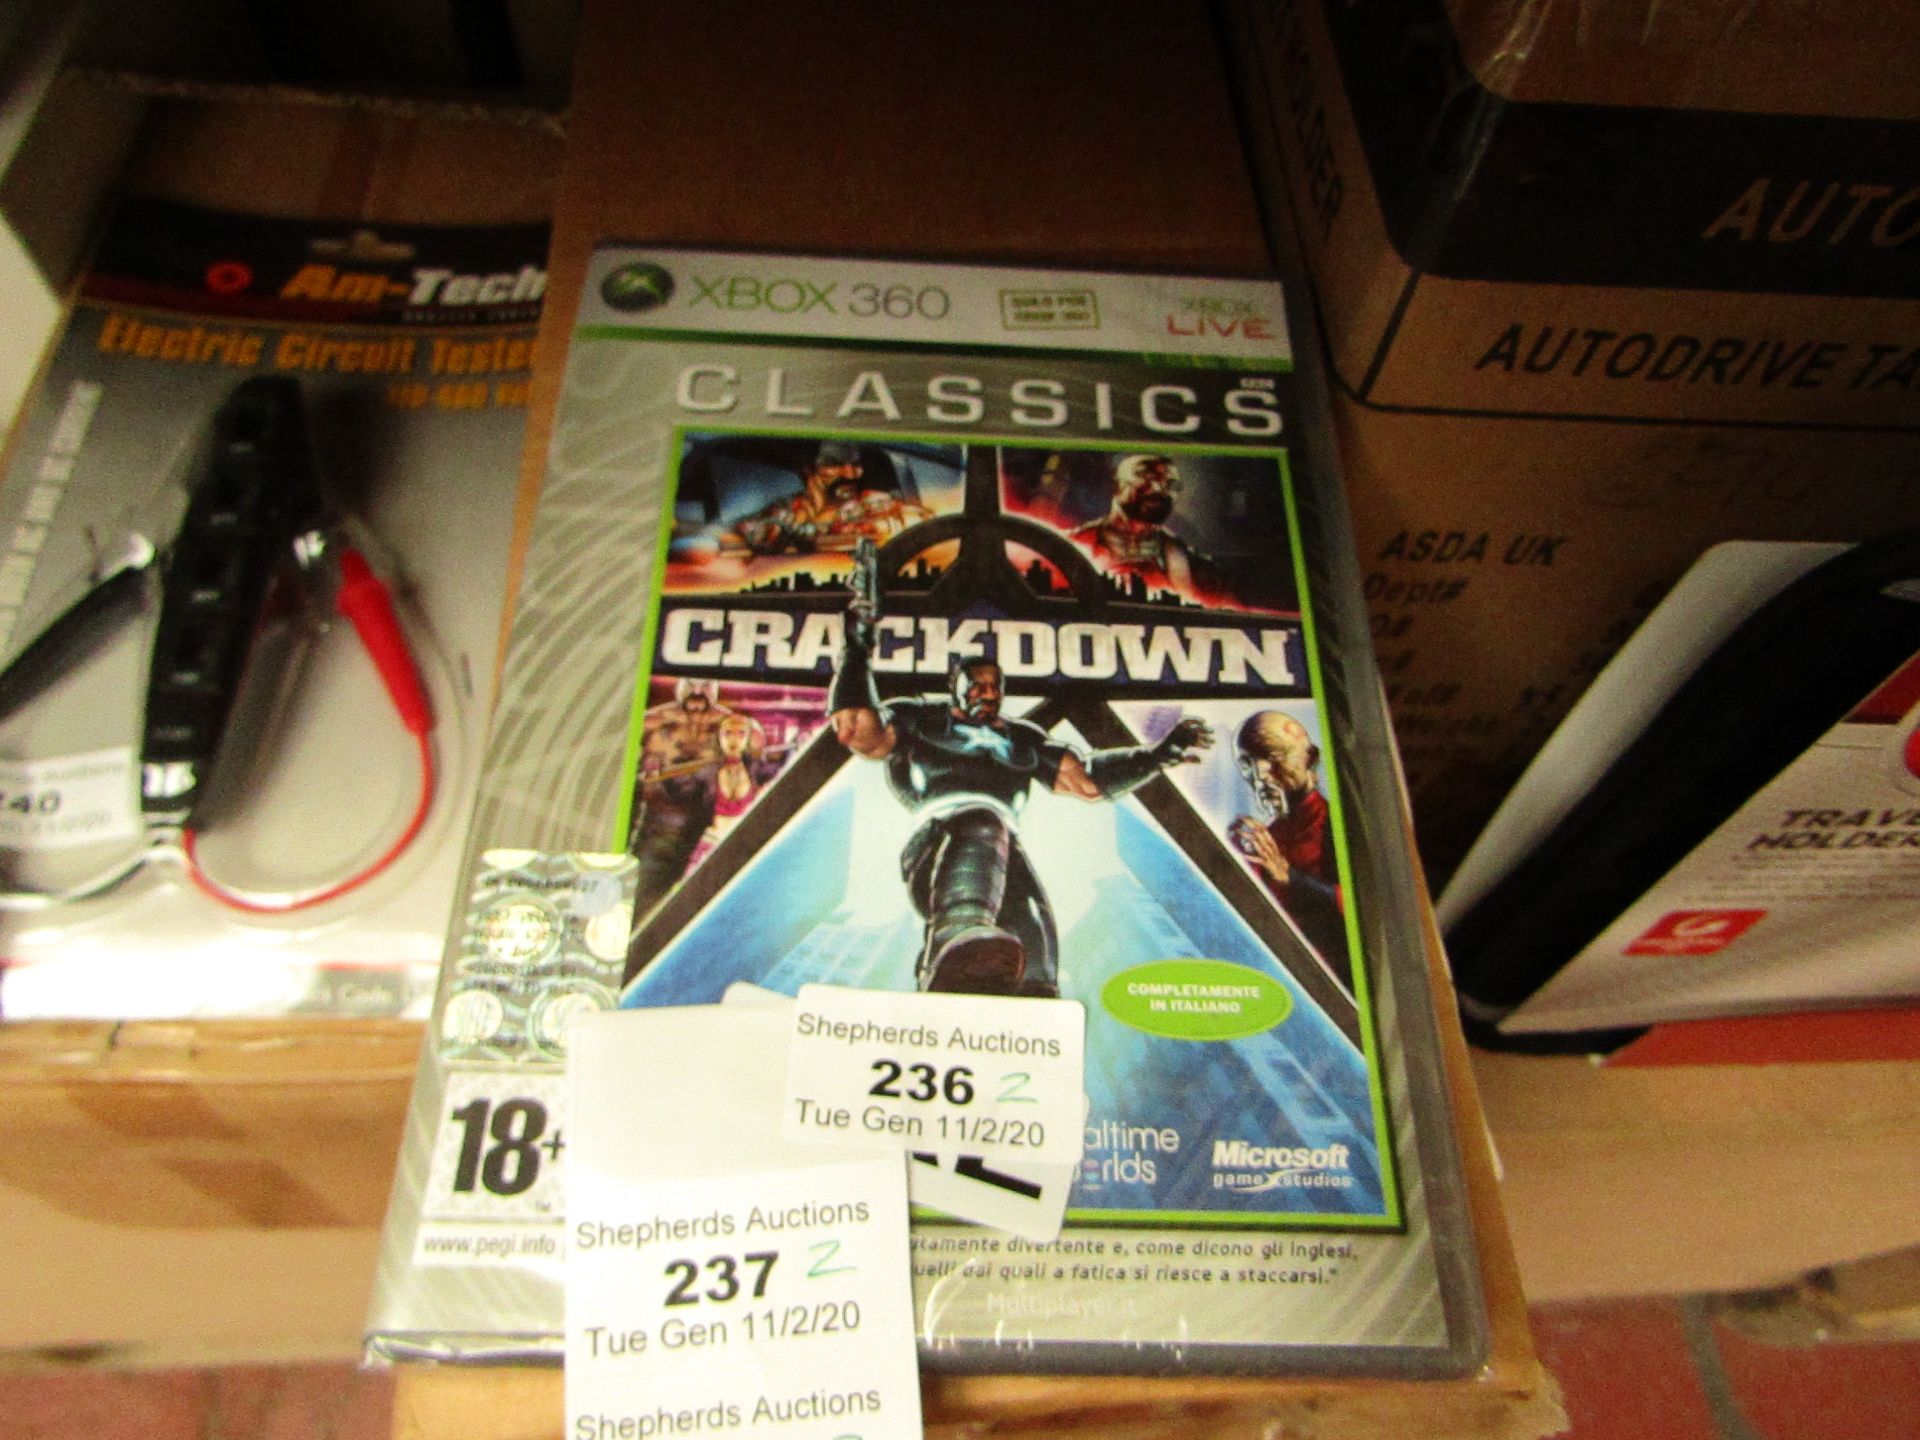 2 x XBOX 360 Crackdown Classics. New in a sealed case